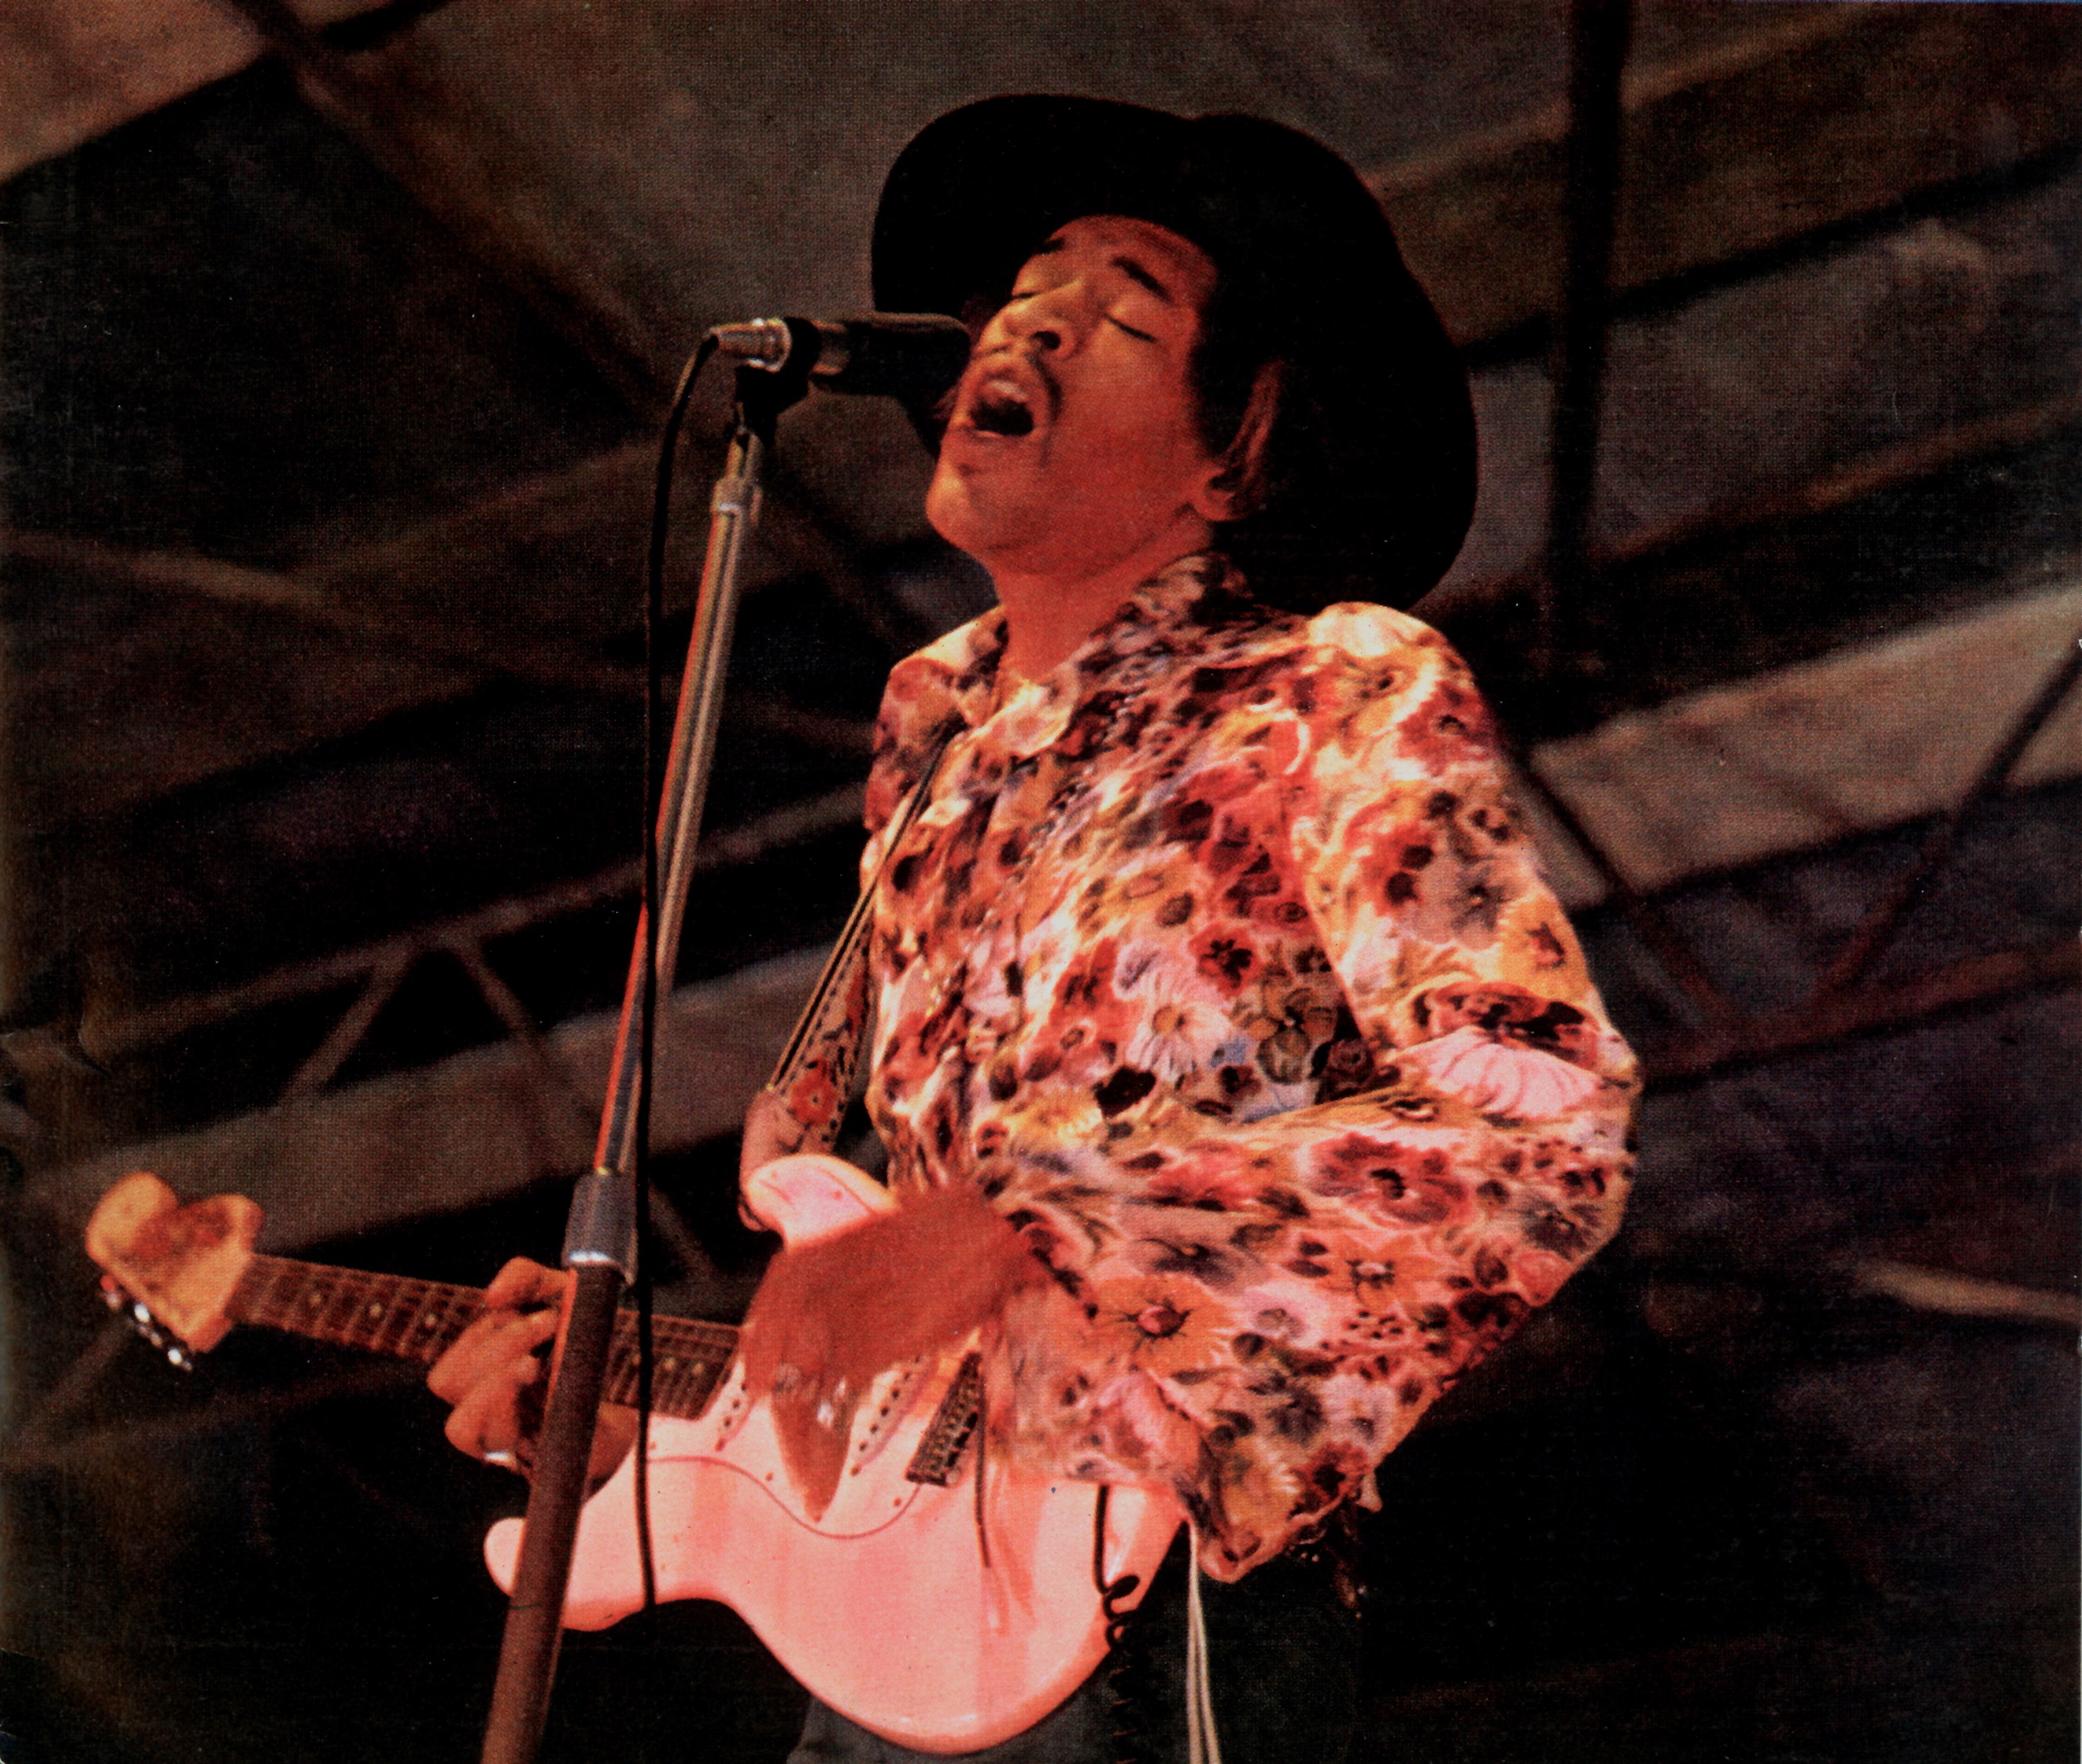 Jimi Hendrix, who dropped out of high school, performing with a white guitar